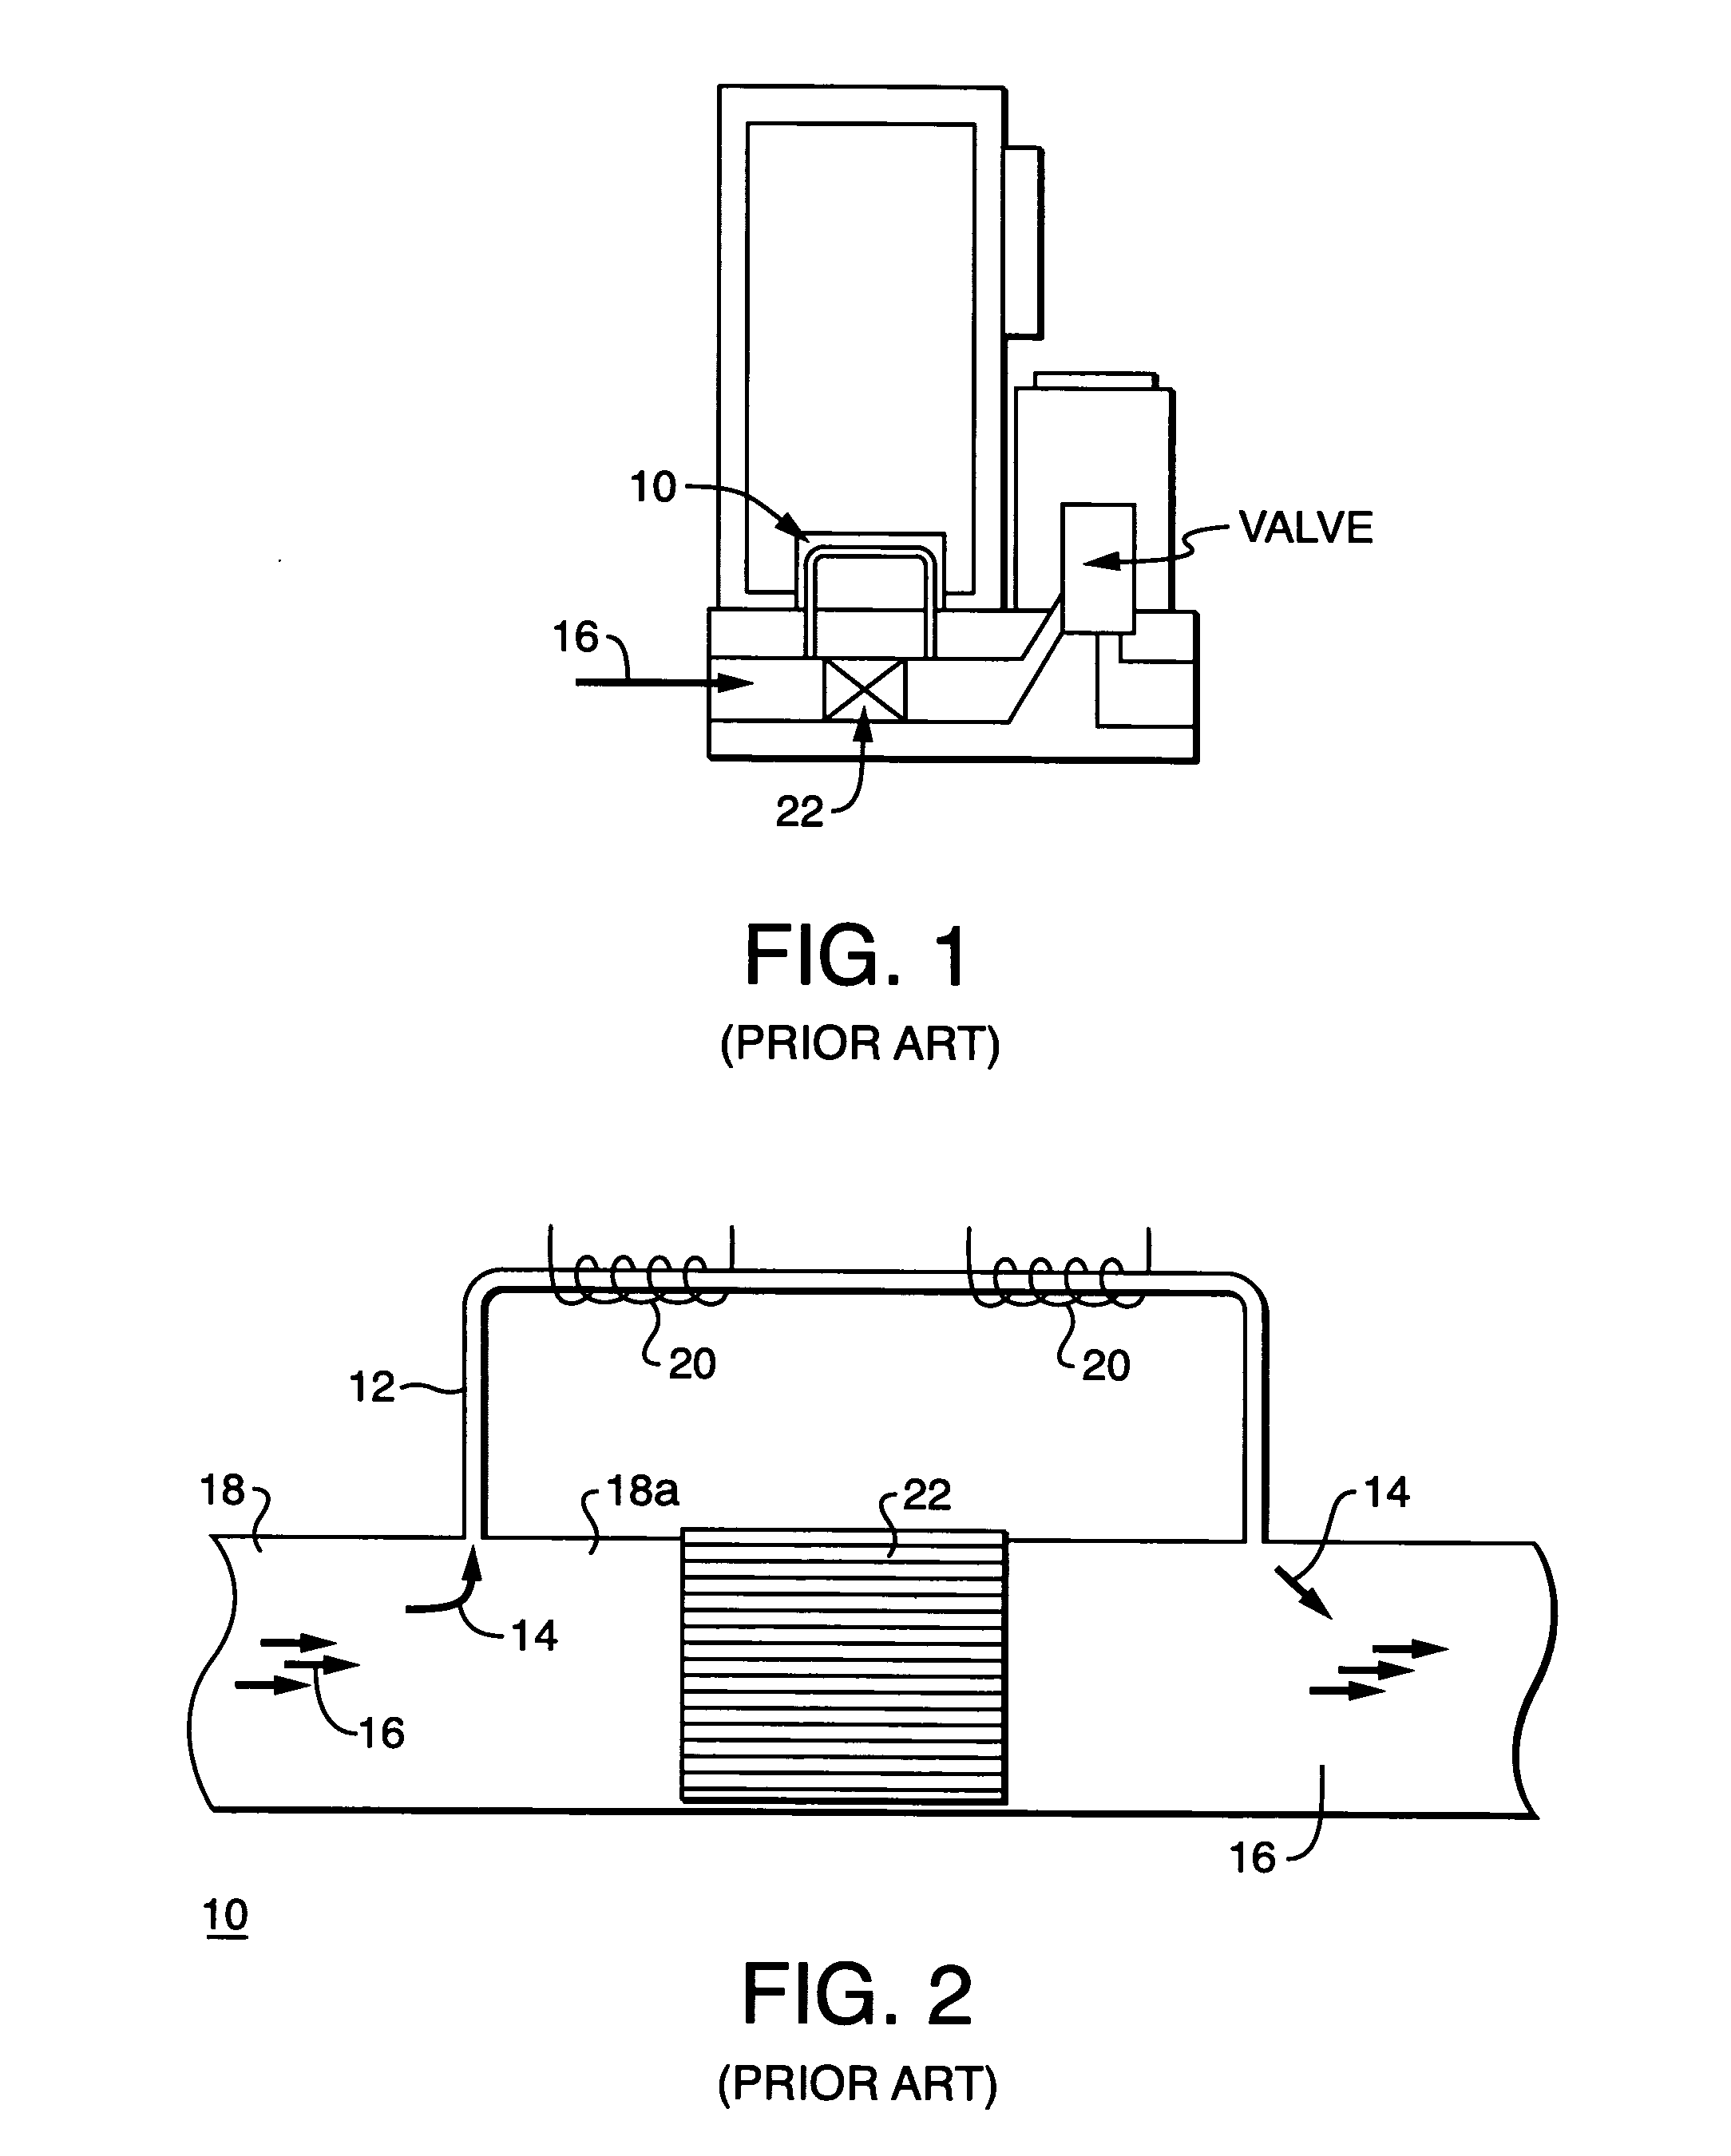 Thermal mass flow rate sensor having fixed bypass ratio